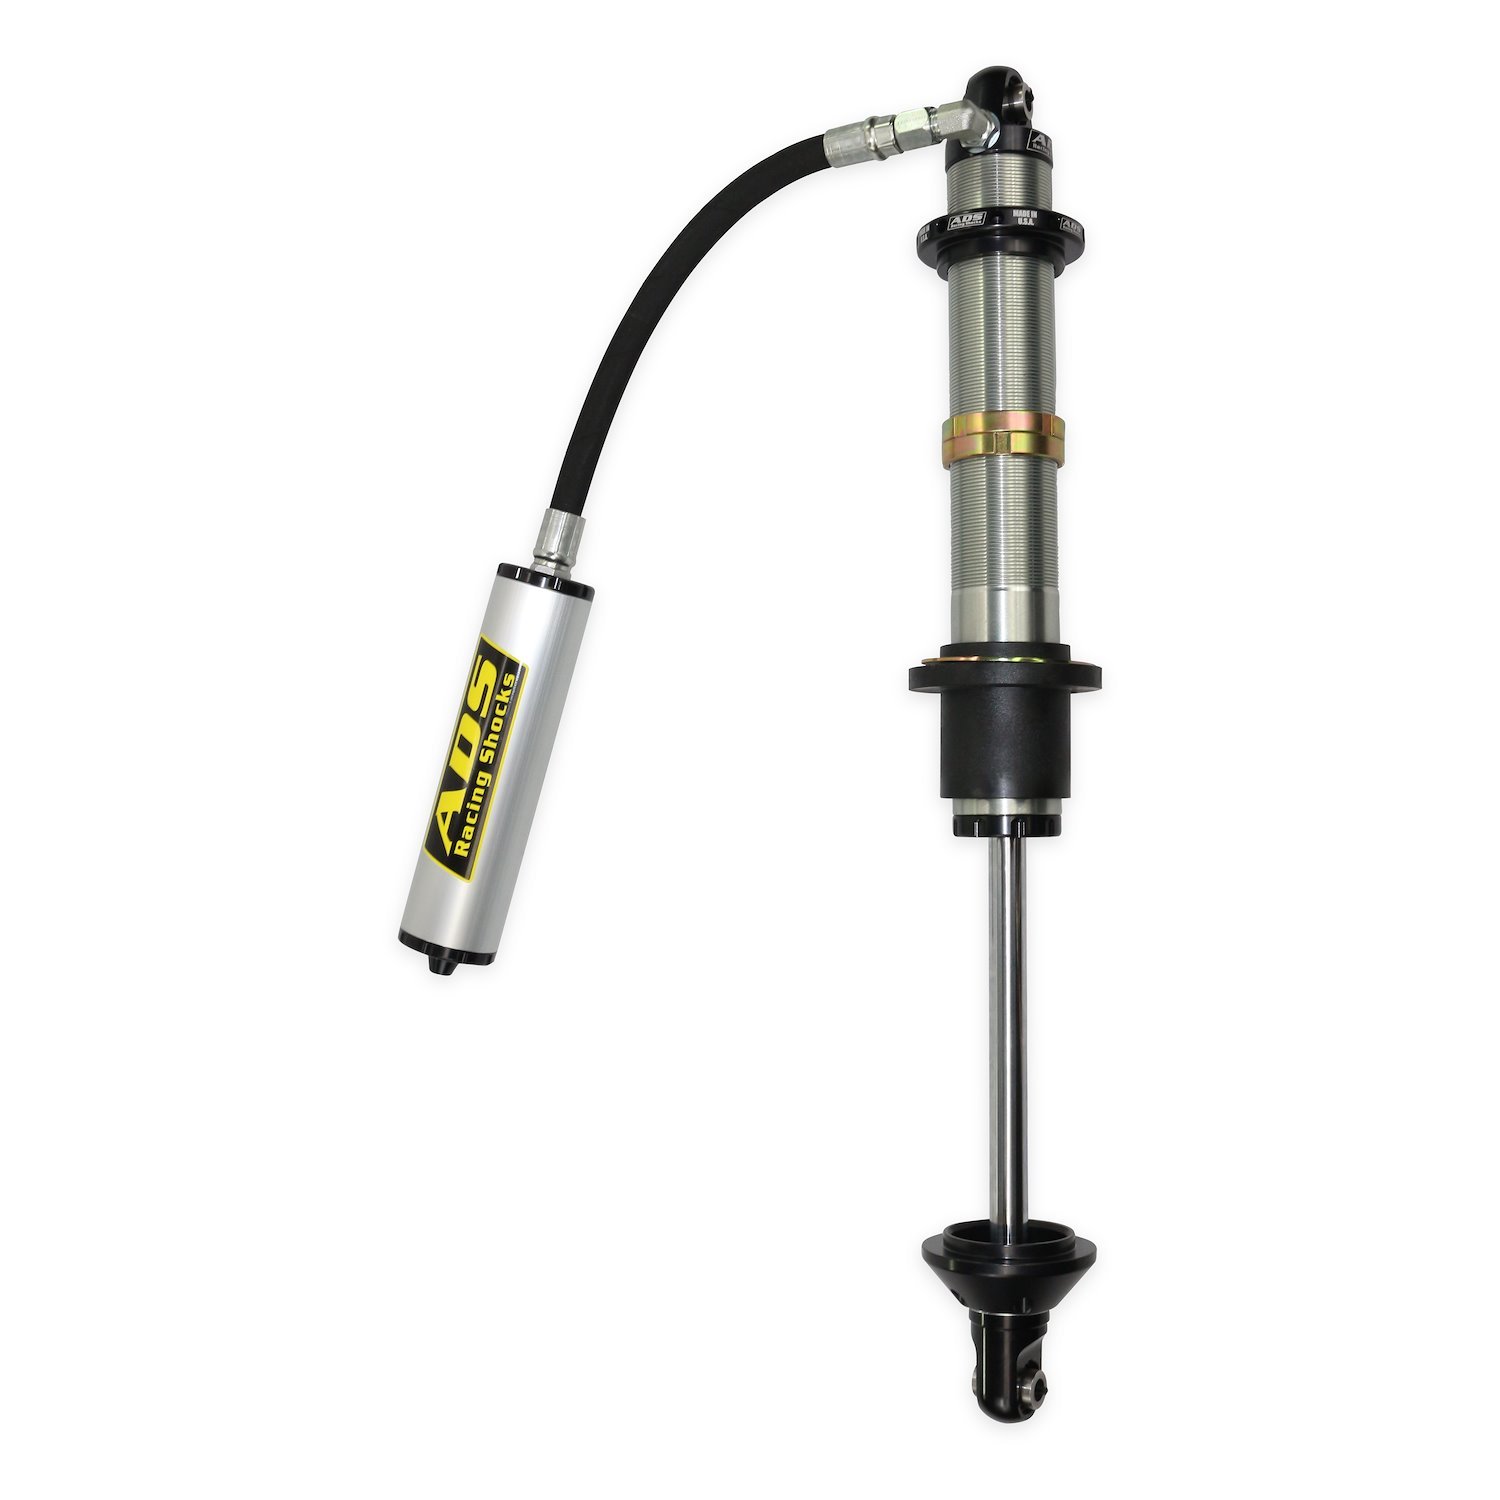 250-COR16-900 Coil-Over Race Shock, 2.5 in. x 16 in. Stroke, w/ Remote Reservoir (90-Degree Hose)